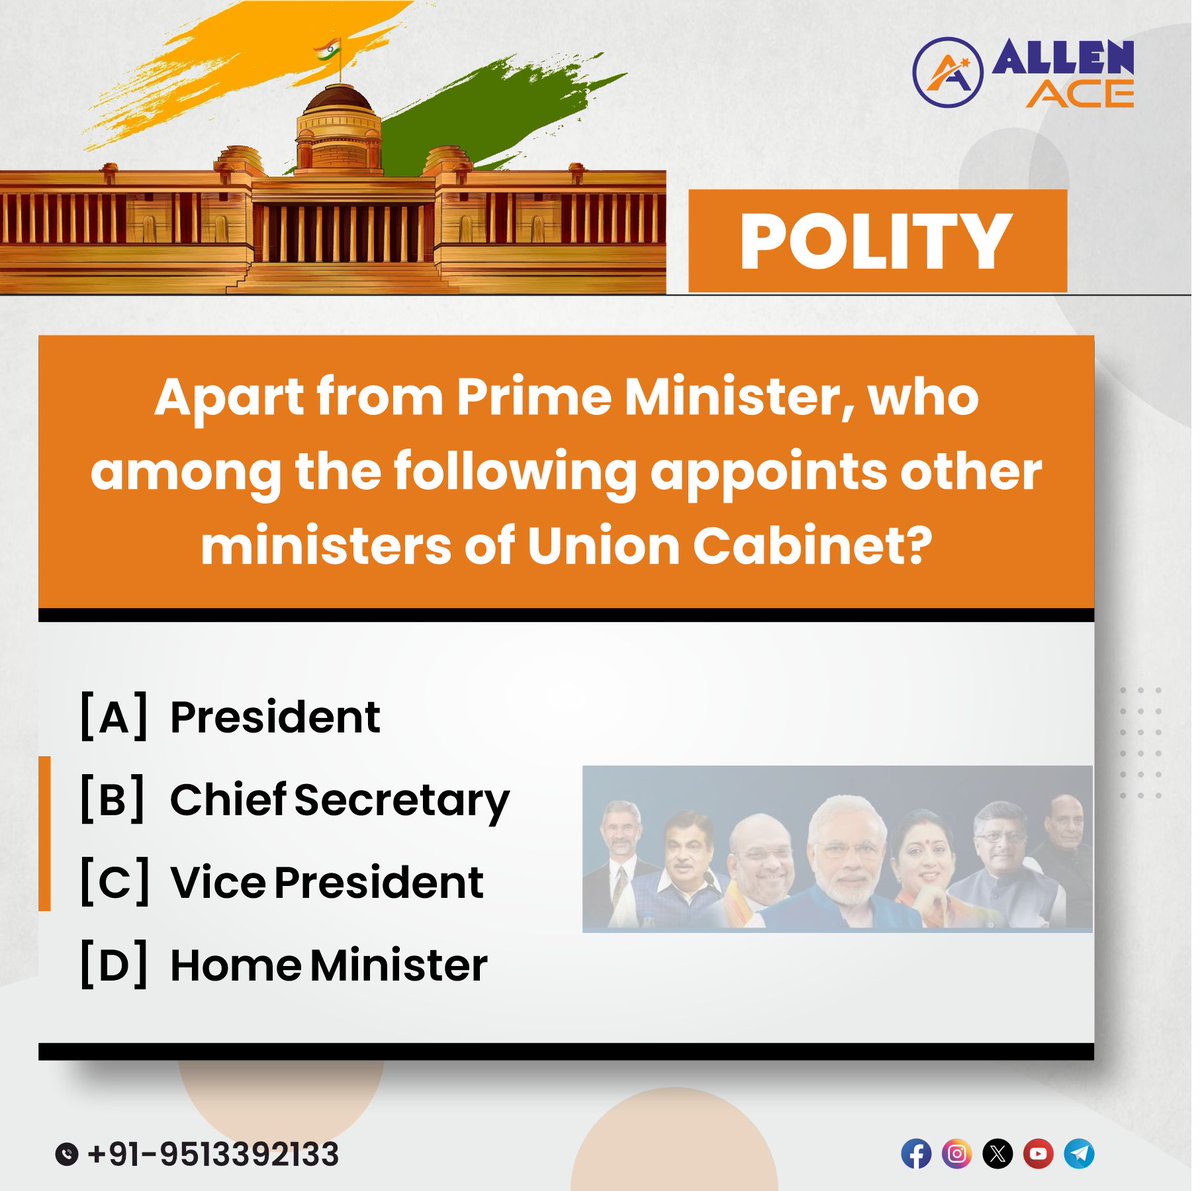 ✅ Are you aware of Indian Polity?

👉 Share your answer in the Comments and enhance your knowledge for the RAS Exam.

#rajasthanpolity #polity #polityquiz #articles #Constitution #RPSC #rpscexam2023
#ALLENRAS #RASPreparation #RASExam #StatePolity #ALLENACE #Jaipur